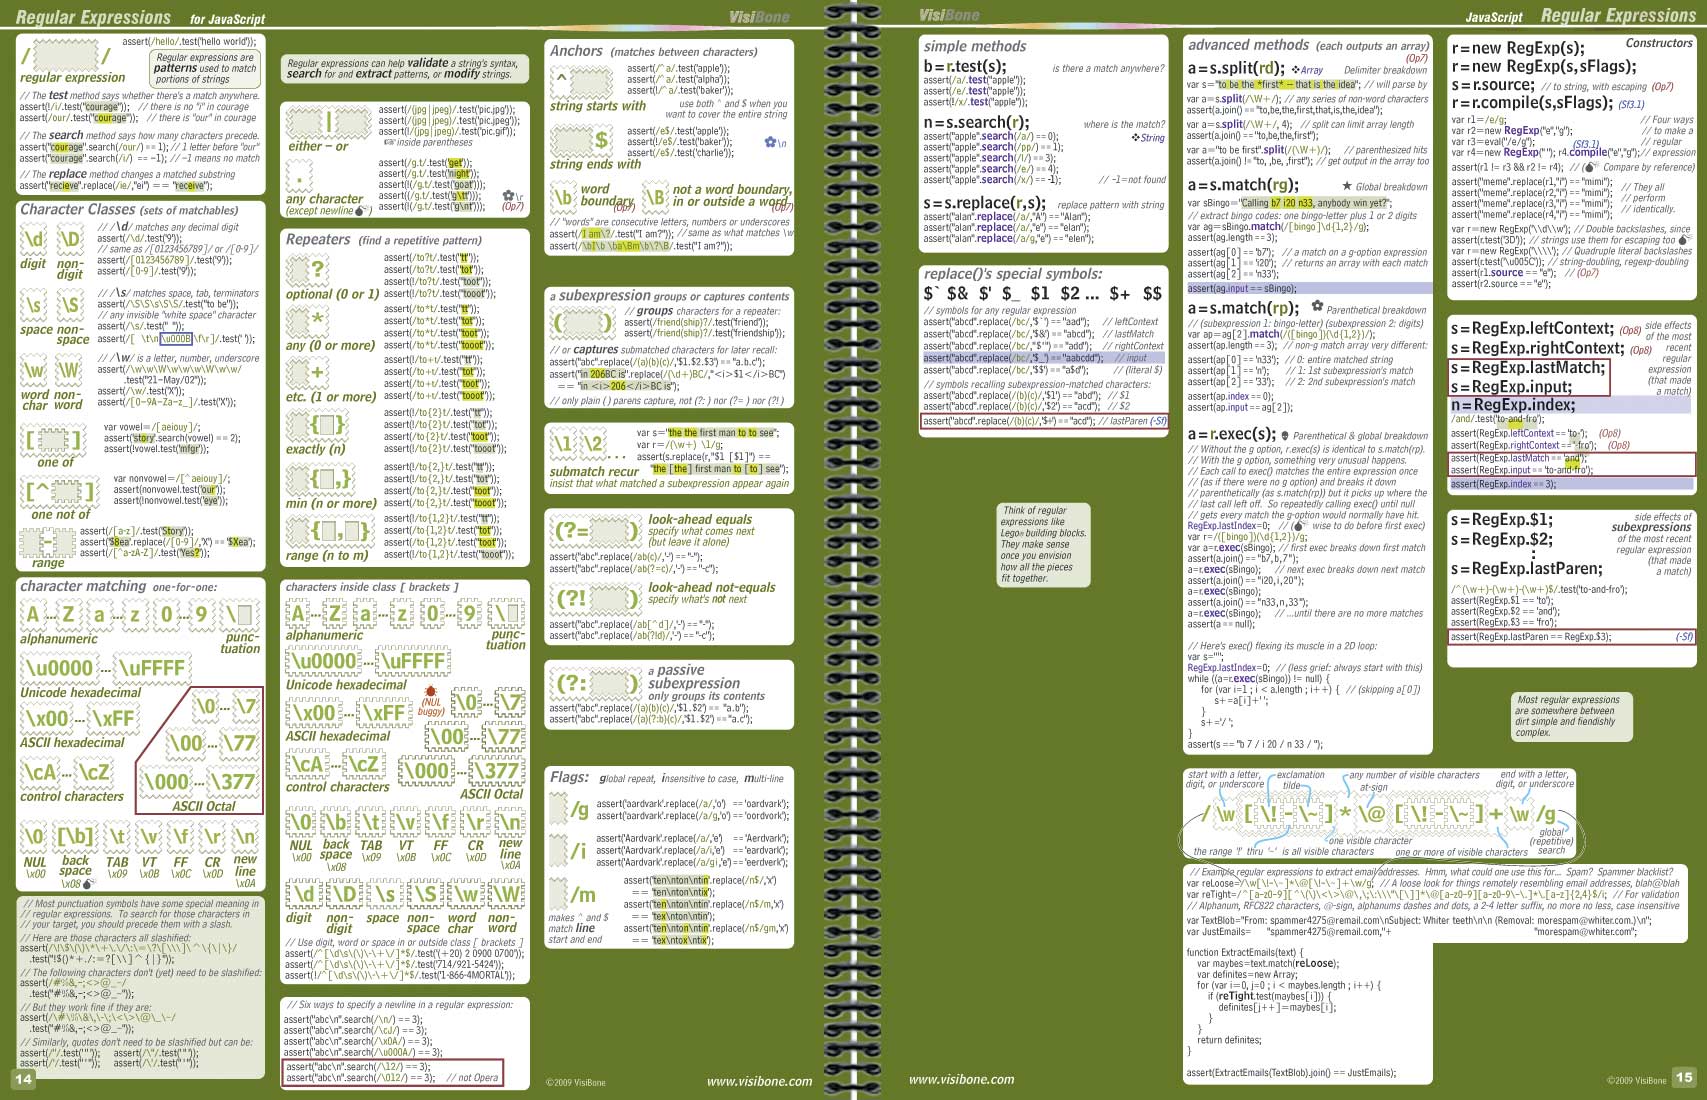 The VisiBone Everything Book Pages 14-15: Regular Expressions